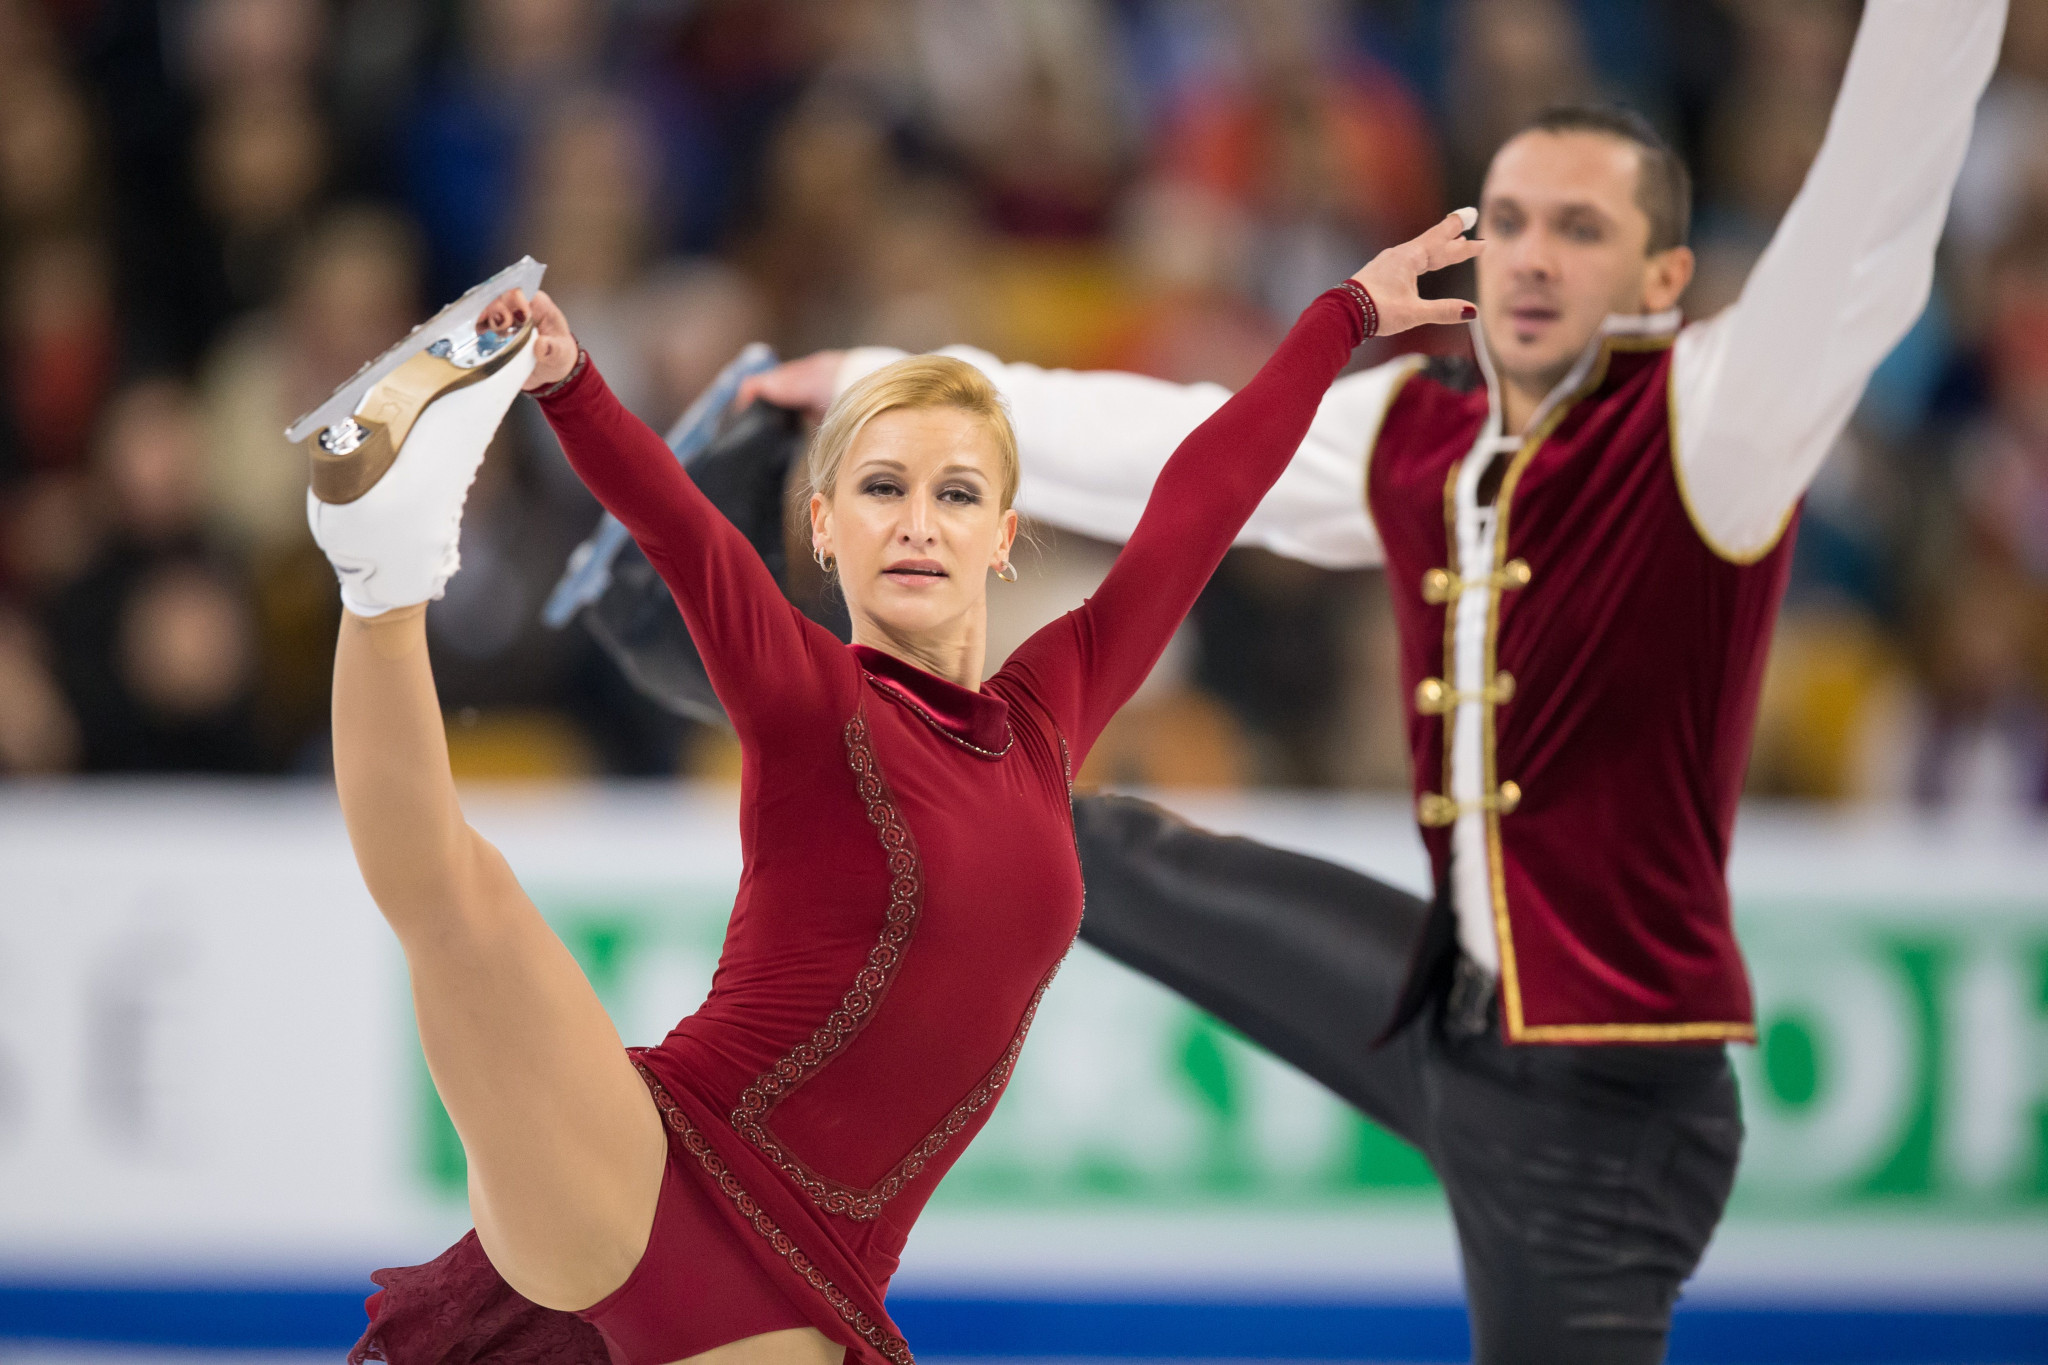 Russian figure skaters Maxim Trankov and Tatiana Volosozhar are on the Team Visa roster, despite their country's participation under their own flag still being in doubt ©Getty Images